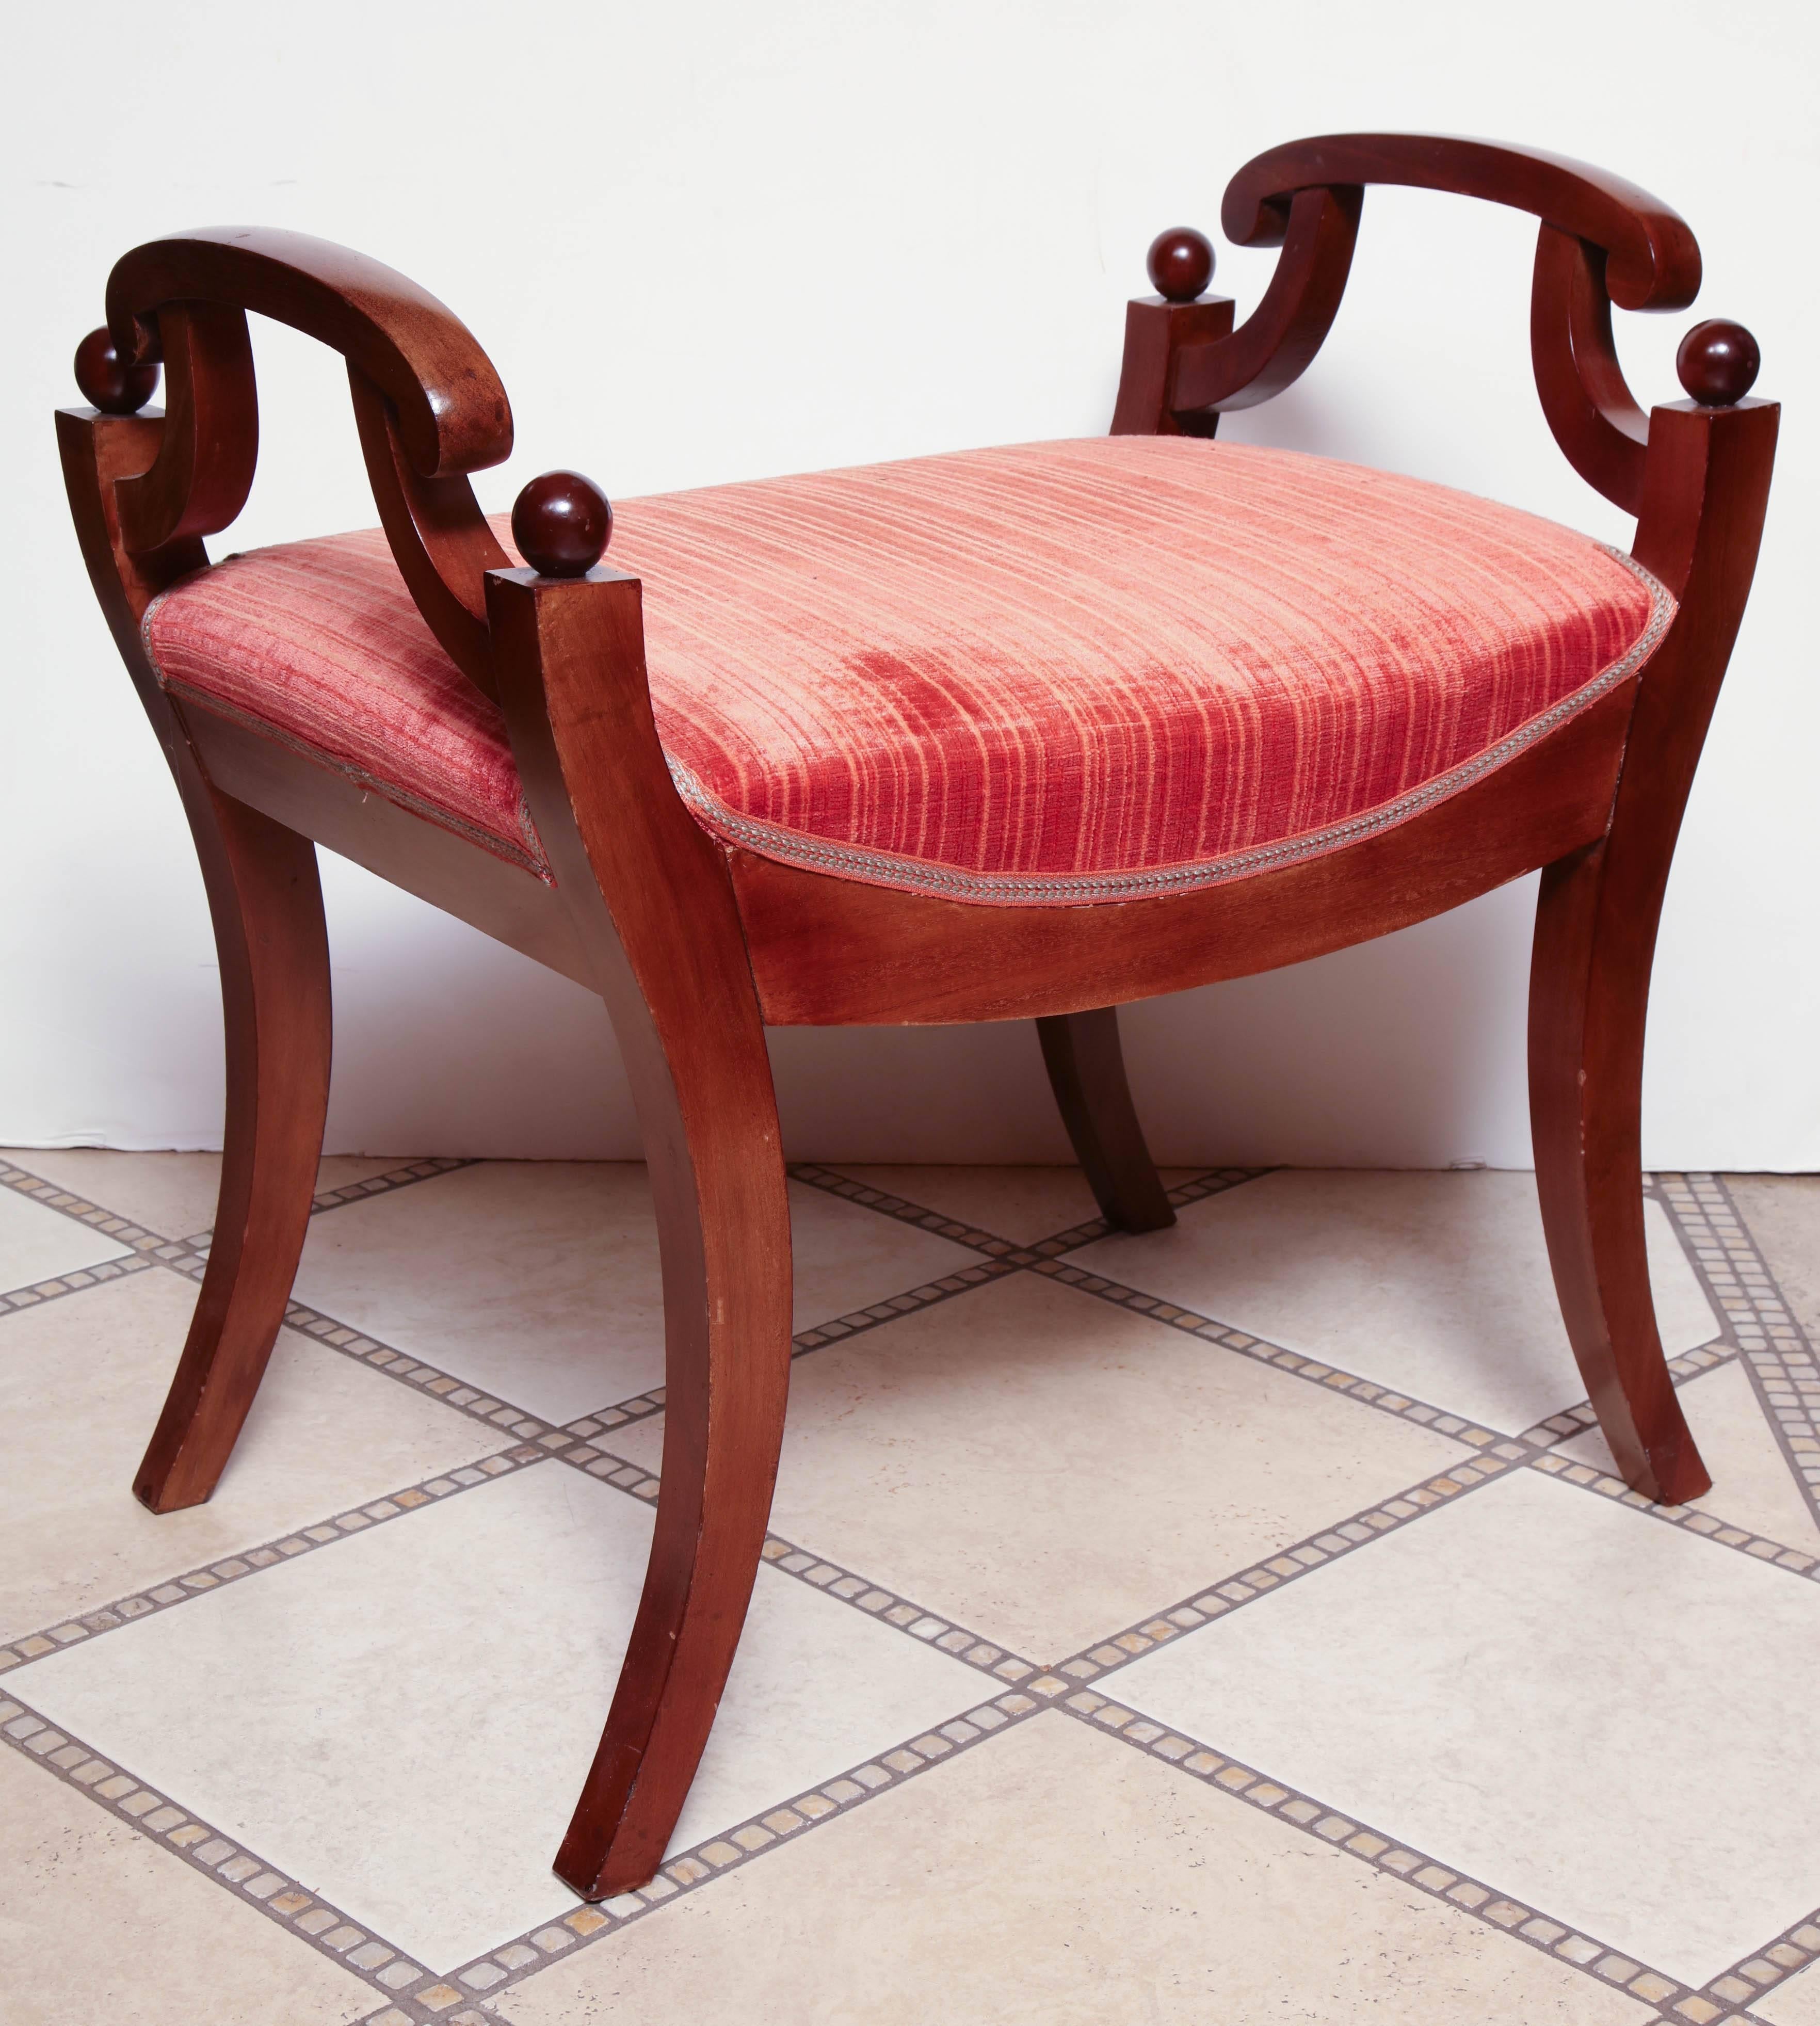 Pair of Neo Classic Mahogany stools with upholstered saddle seat and out-flaring legs.